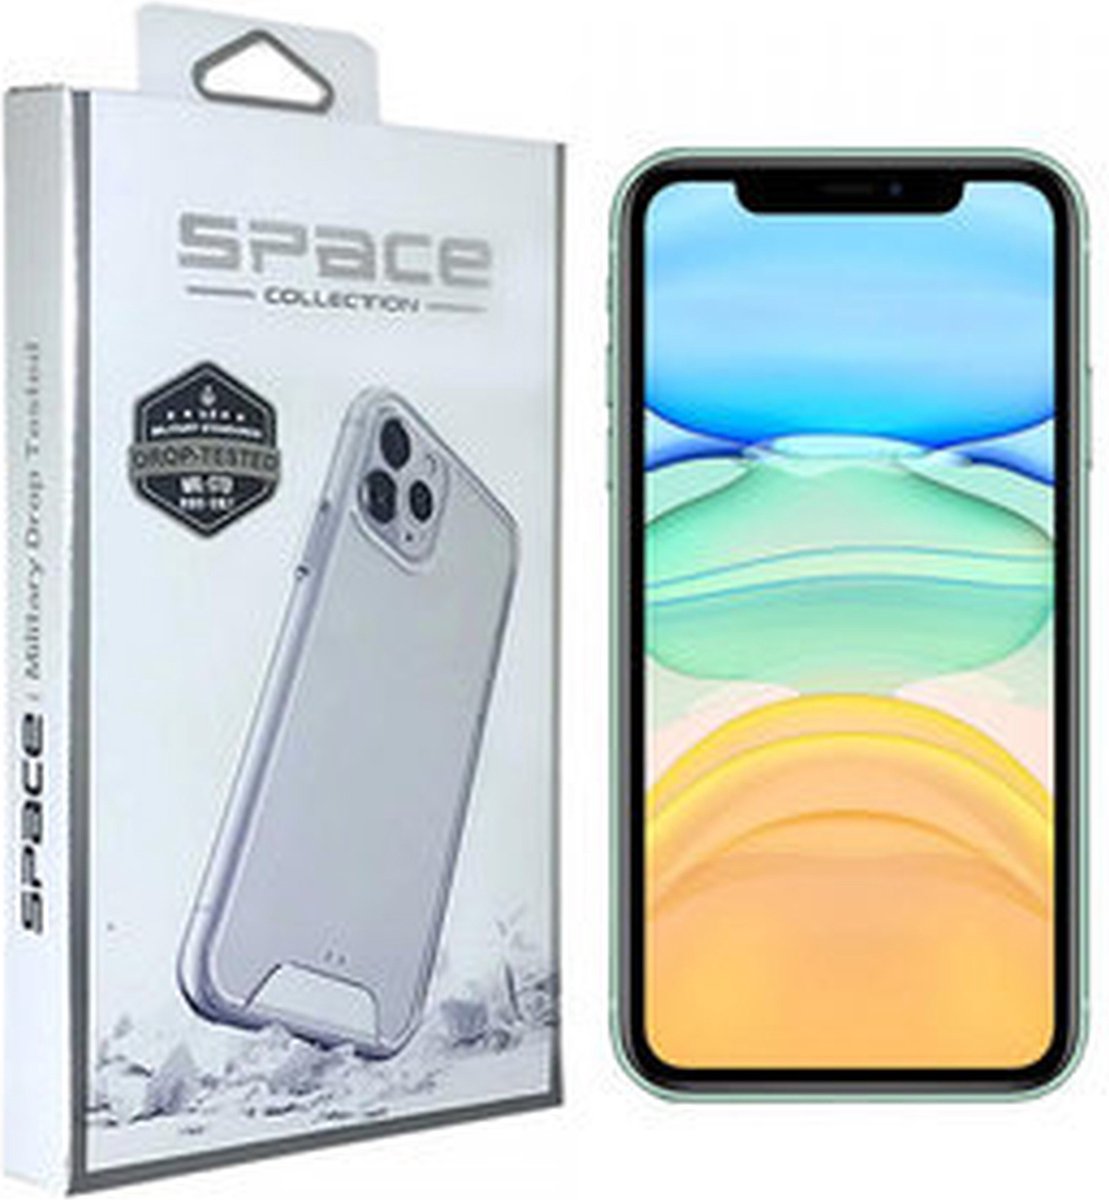 Space collection | backcover | Transparent | A52 5G